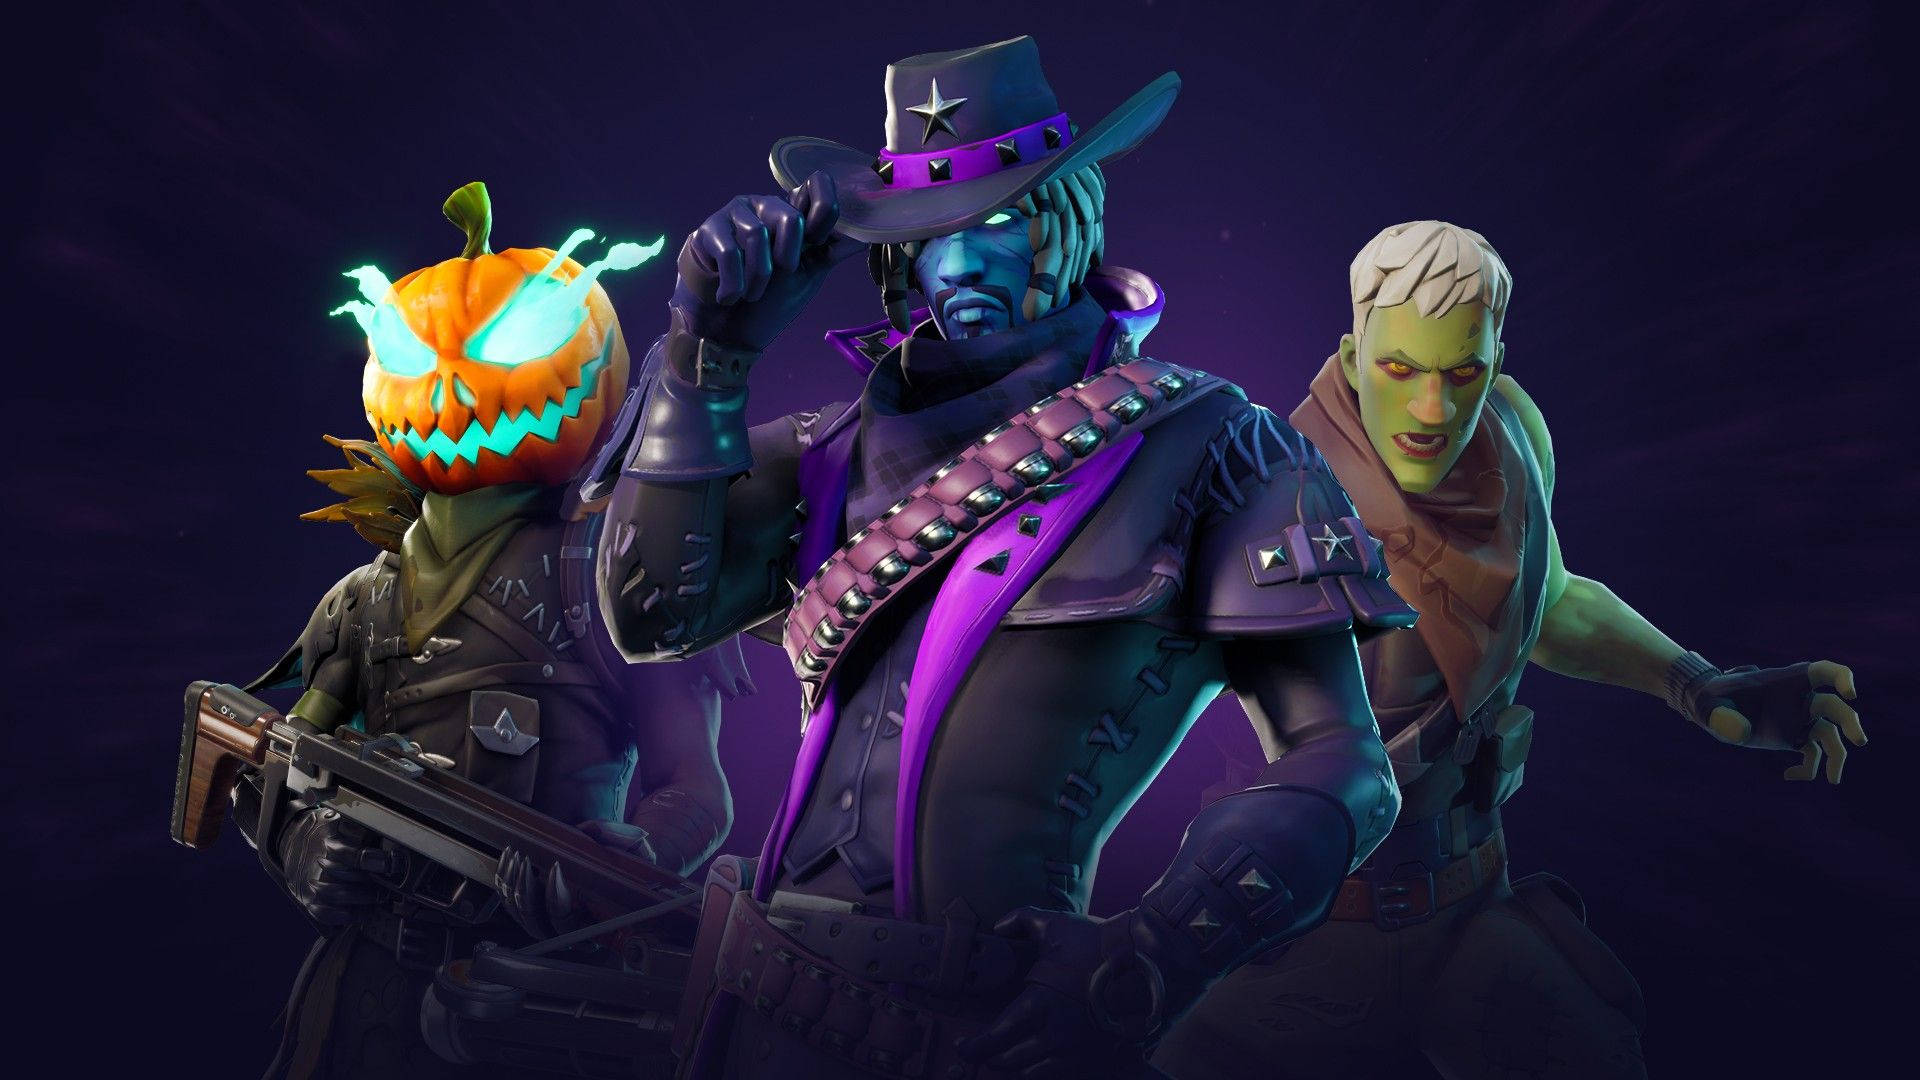 Get spooked with the new Apex Legends Halloween Skin! Wallpaper